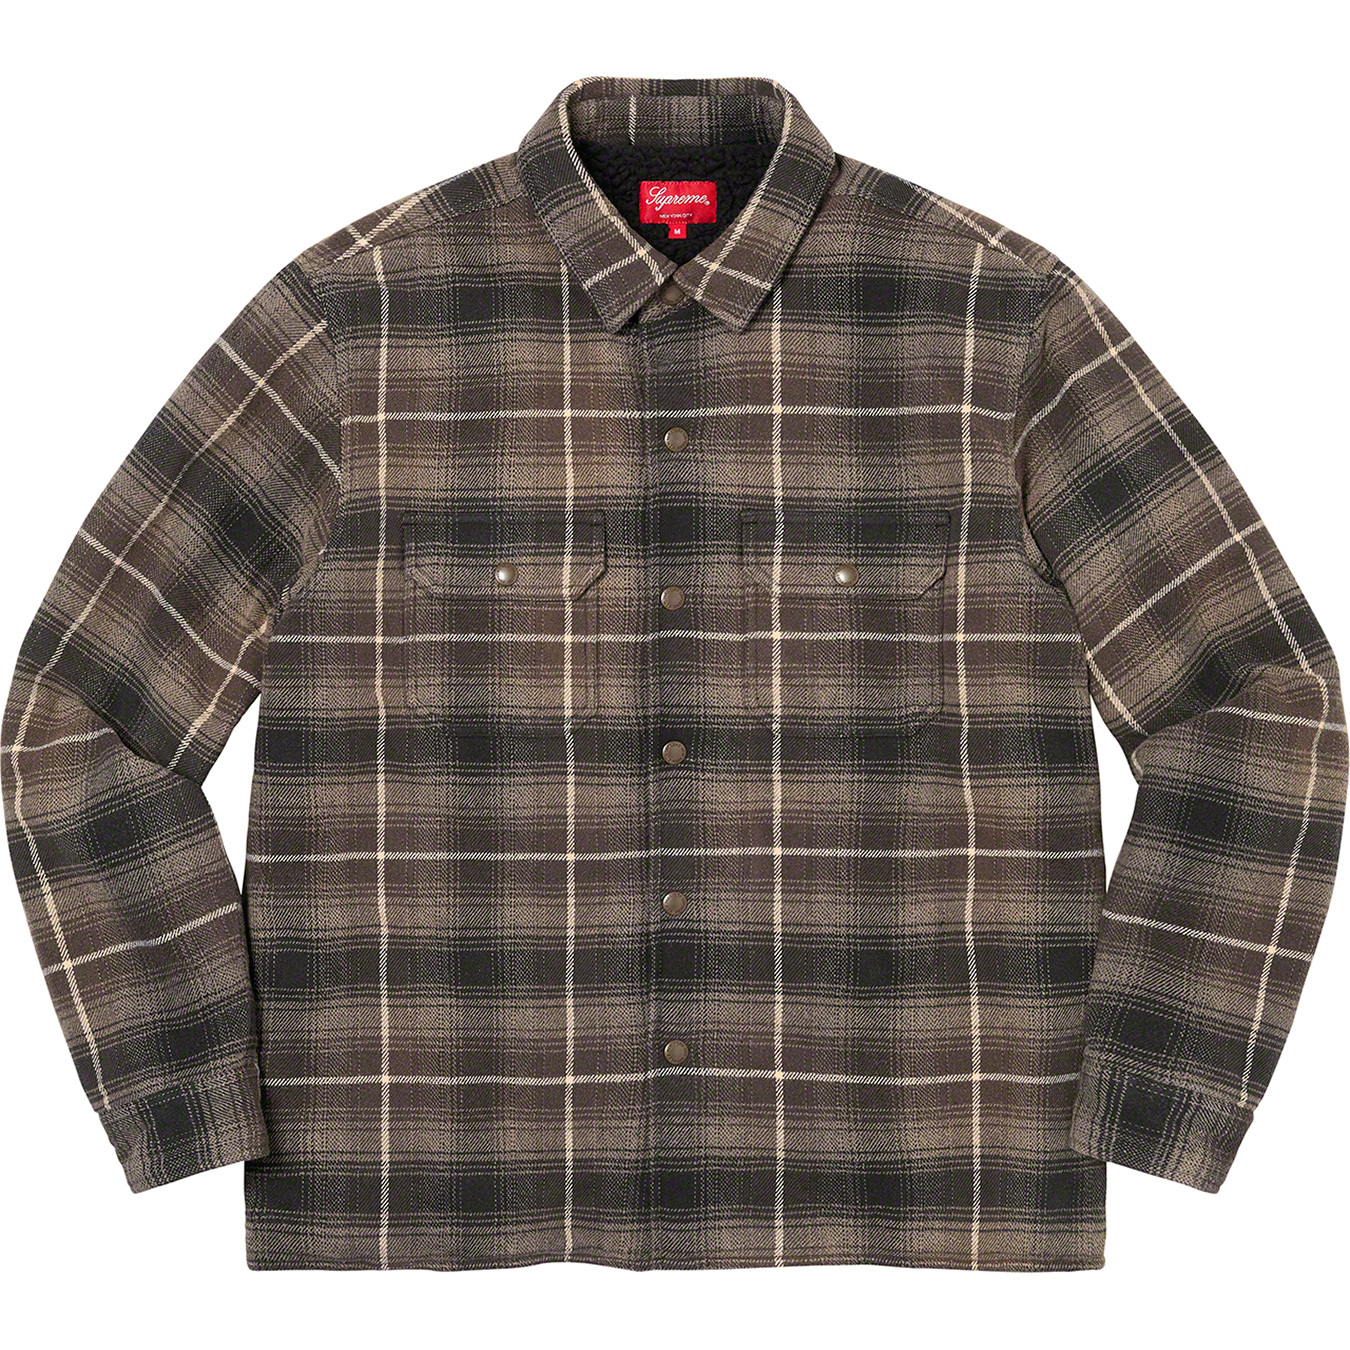 59%OFF!】【59%OFF!】Supreme Shearling Lined Flannel Shirt シャツ 